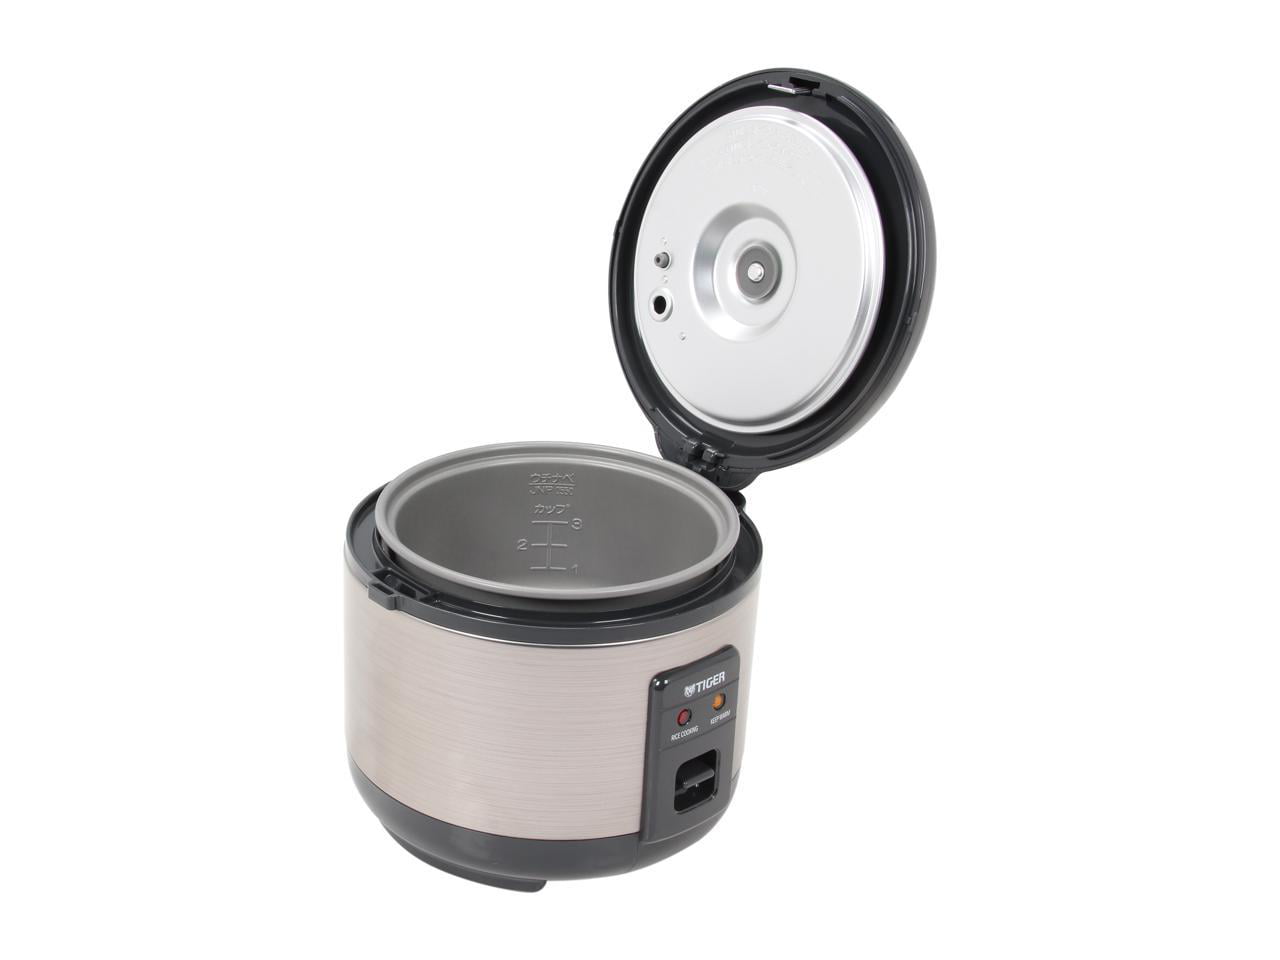 TIGER 10 CUP ELECTRIC RICE COOKER WARMER. KEEP WARM A MAXIMUM OF 12 HOURS.  INCLUDES STEAM BASKET, SPATULA, AND RICE MEASURING CUP. 